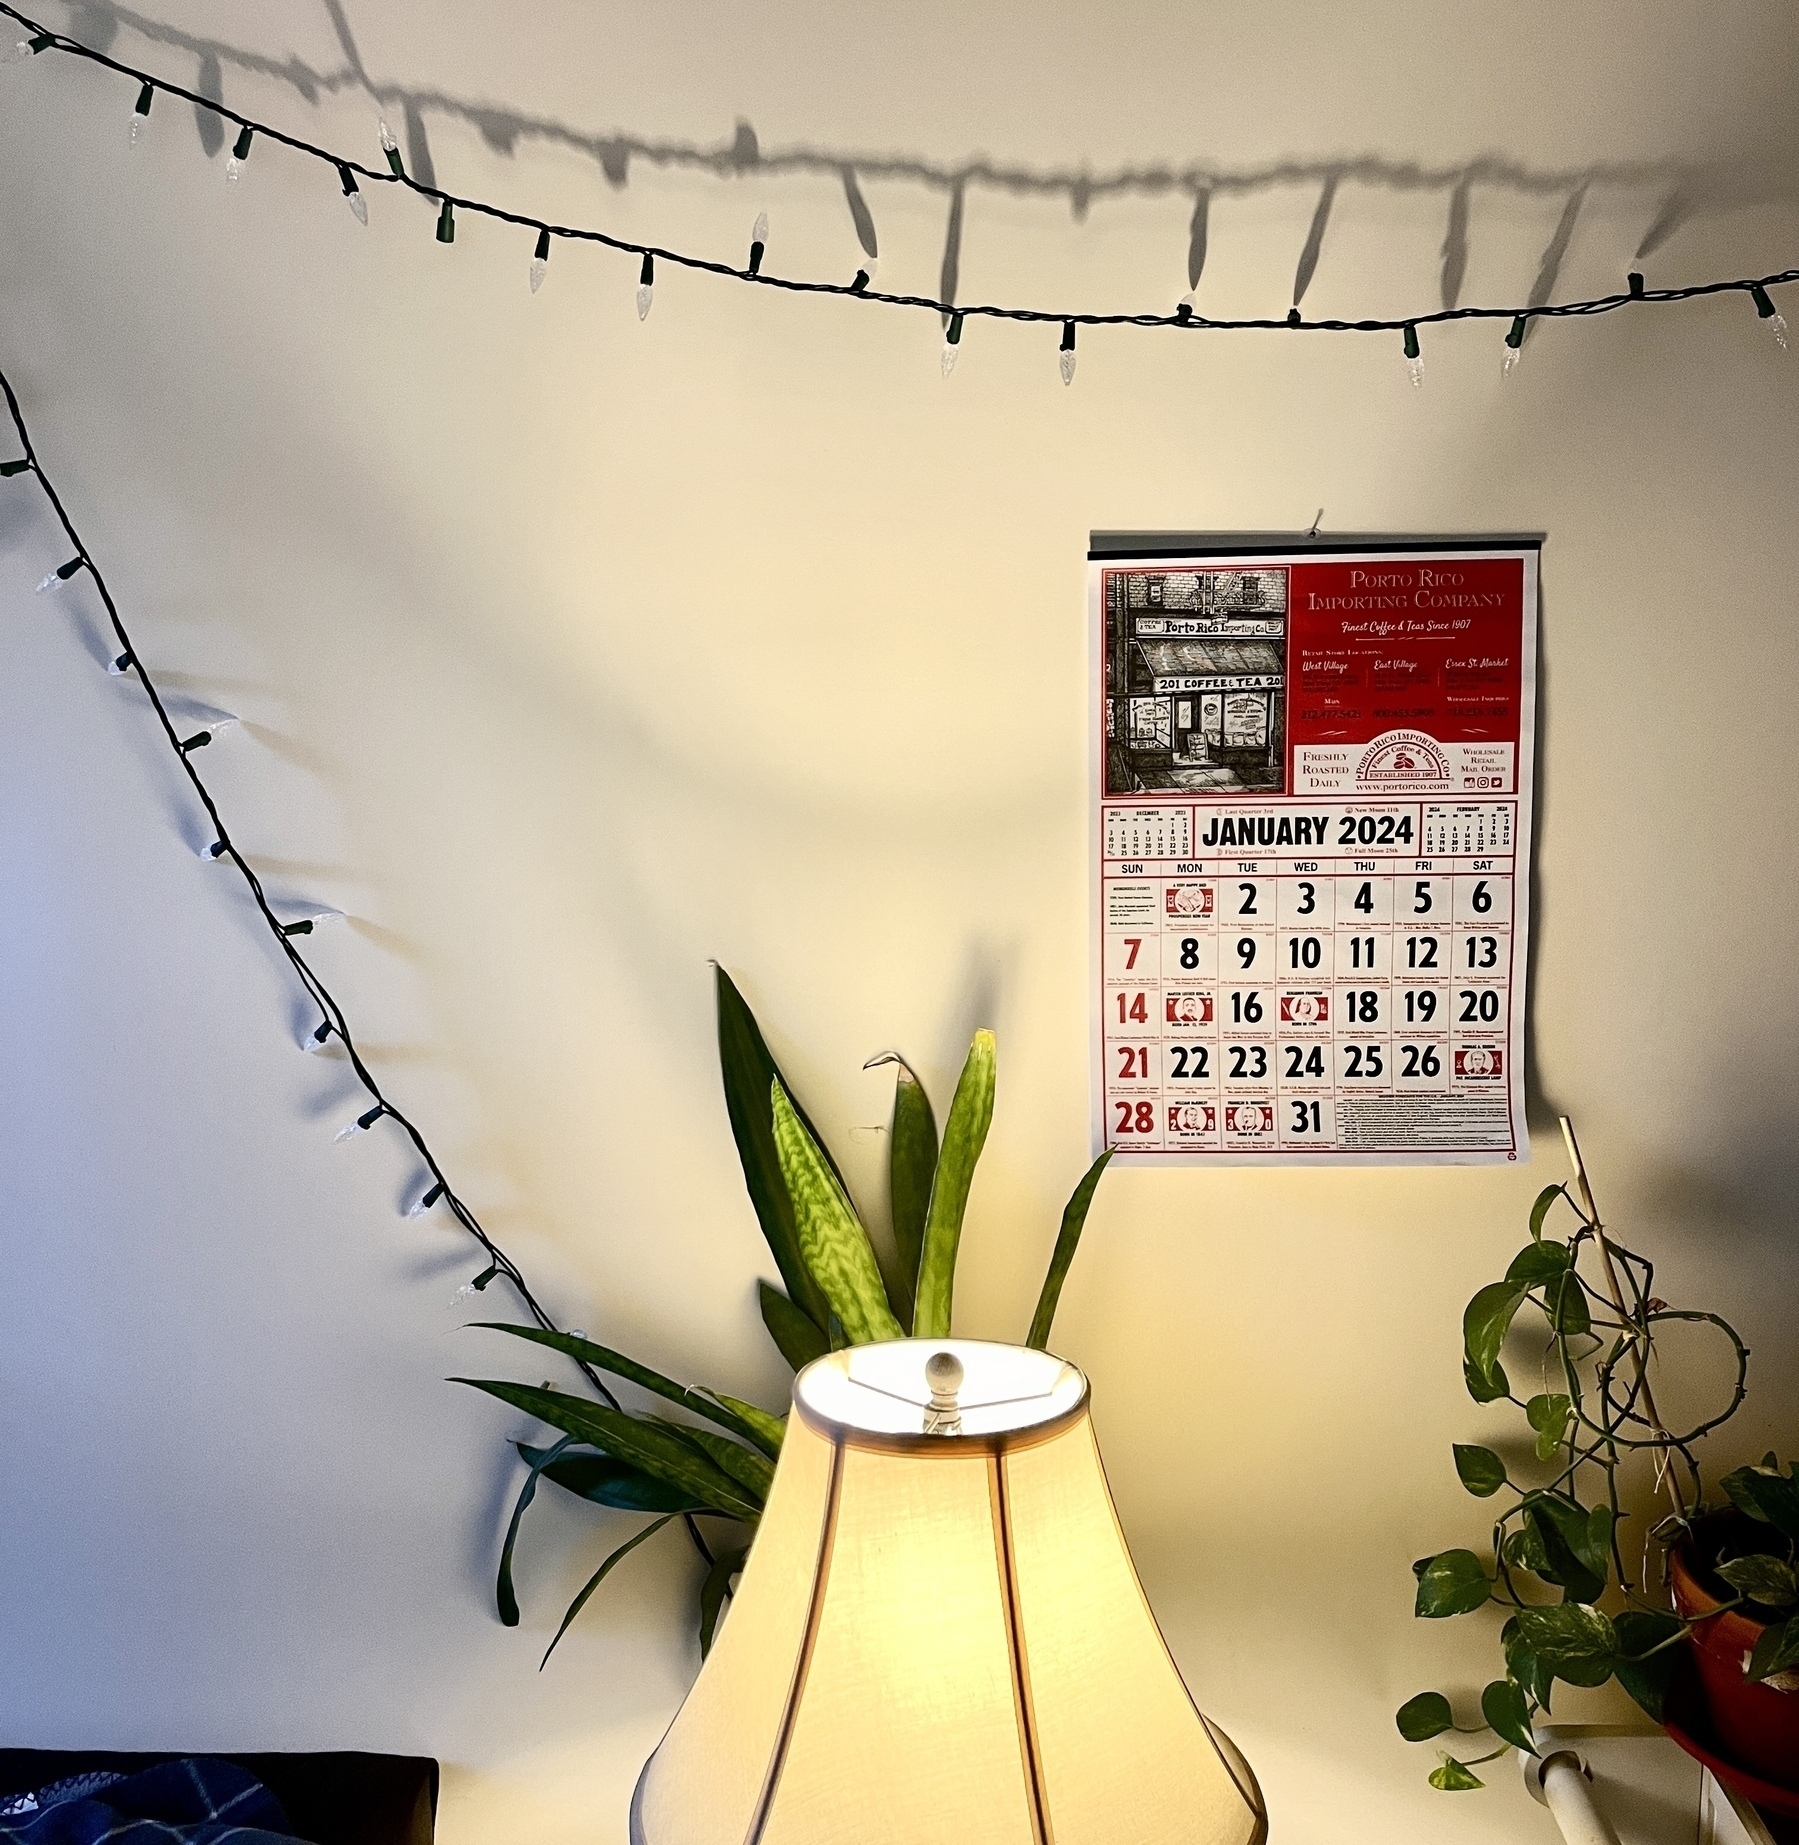 A desk lamp shining warm light unto a 2024 calendar showing the month of January. Lights on a wire cast long shadows on the wall. 